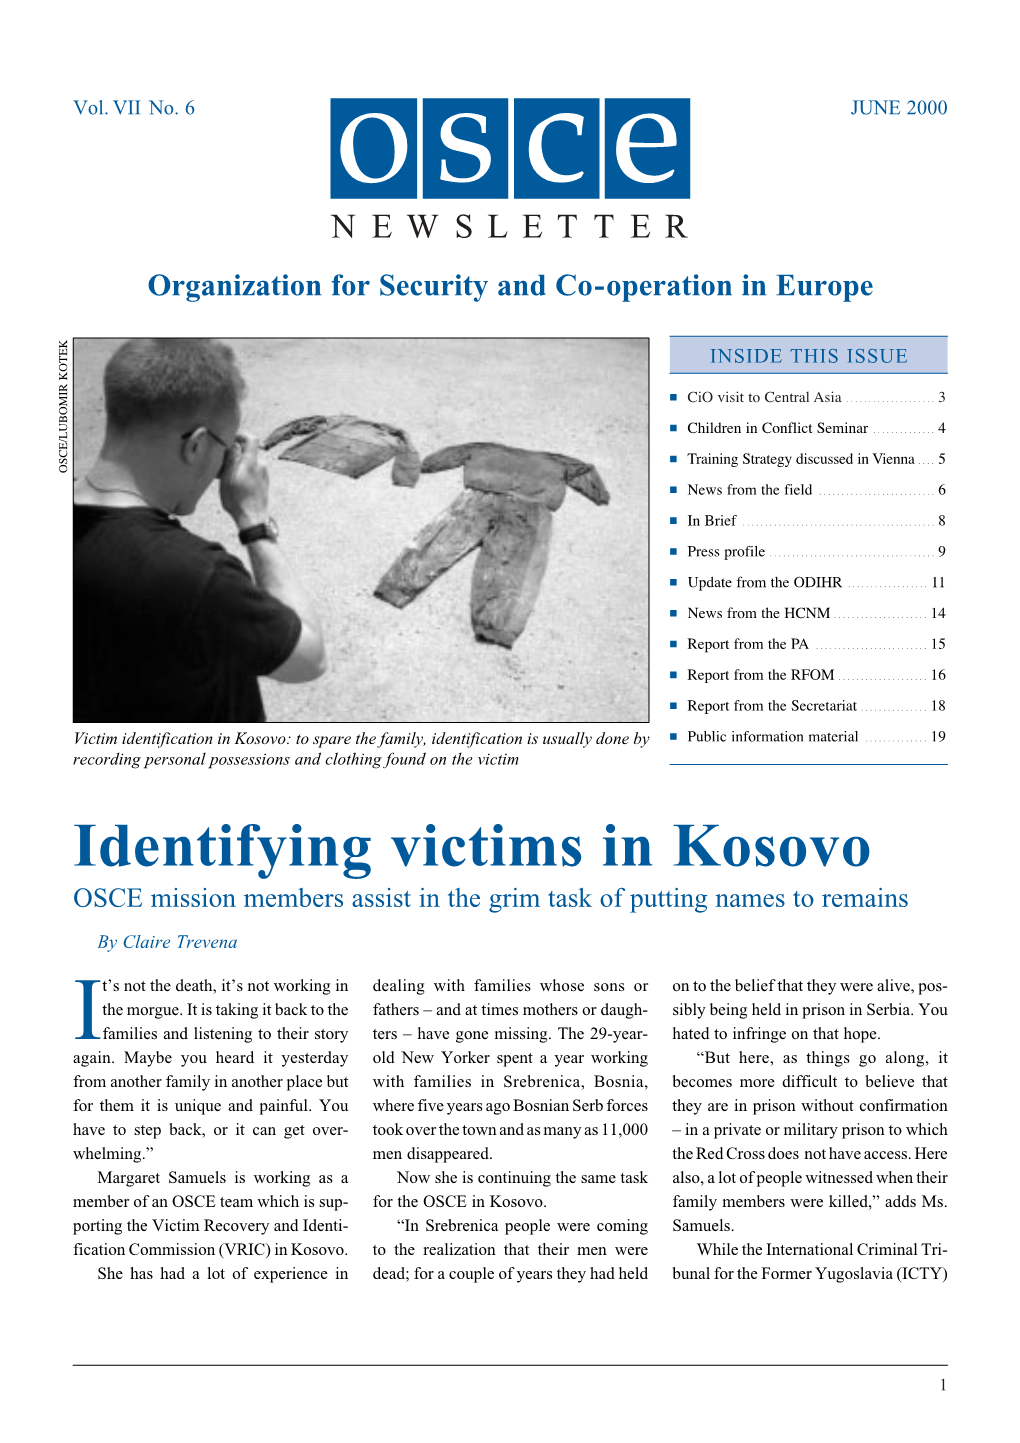 Identifying Victims in Kosovo OSCE Mission Members Assist in the Grim Task of Putting Names to Remains